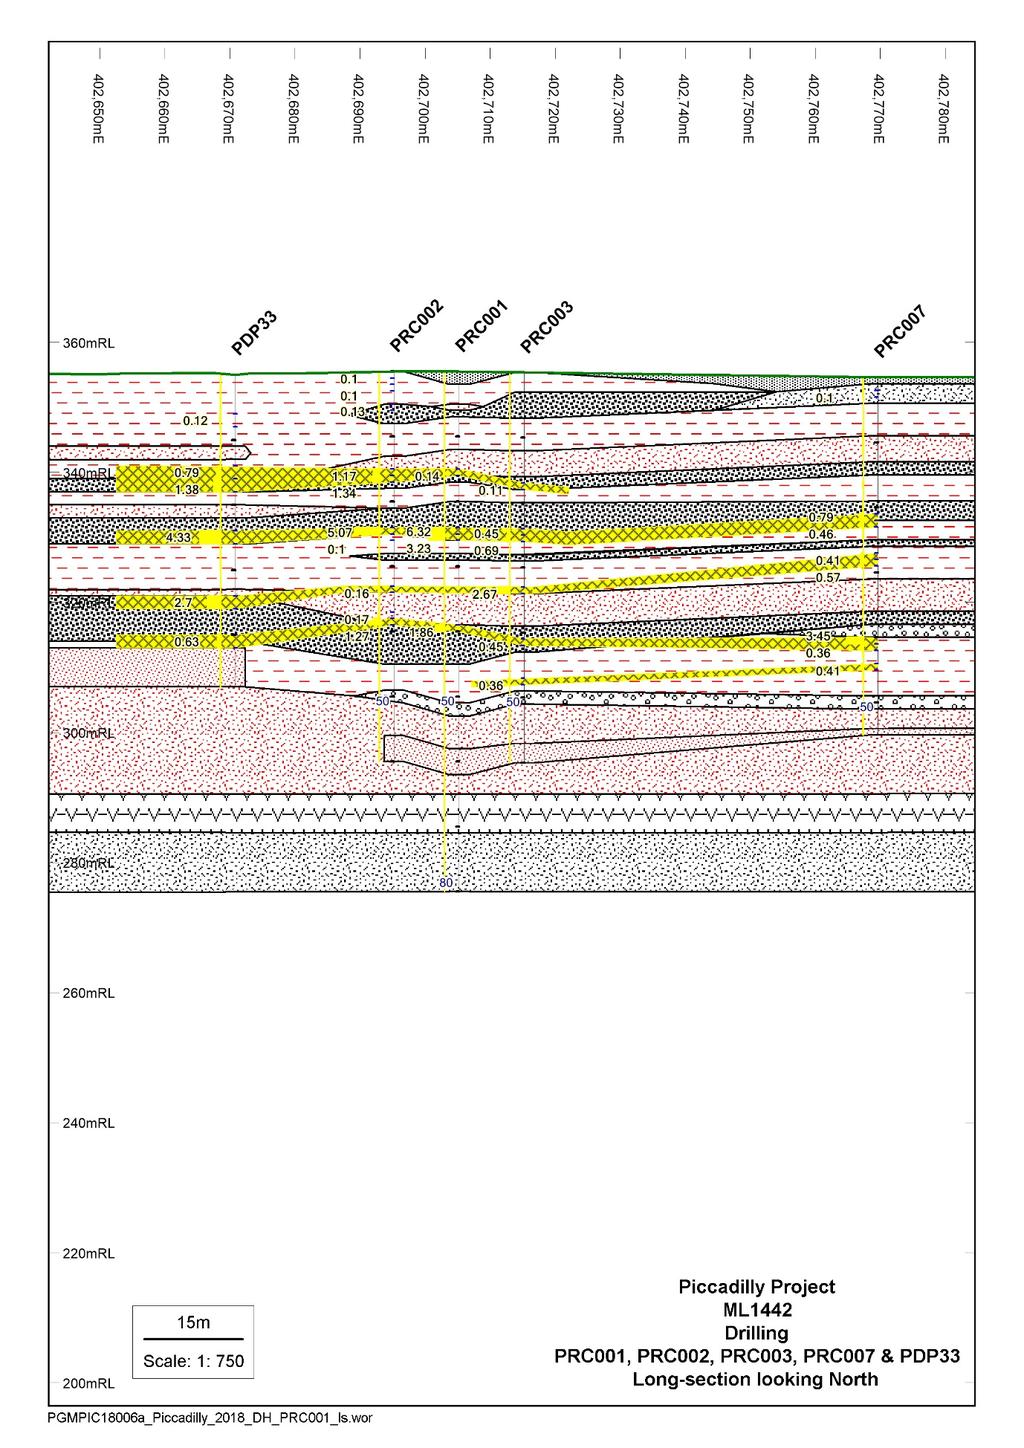 Figure 5 Geological Long section (right